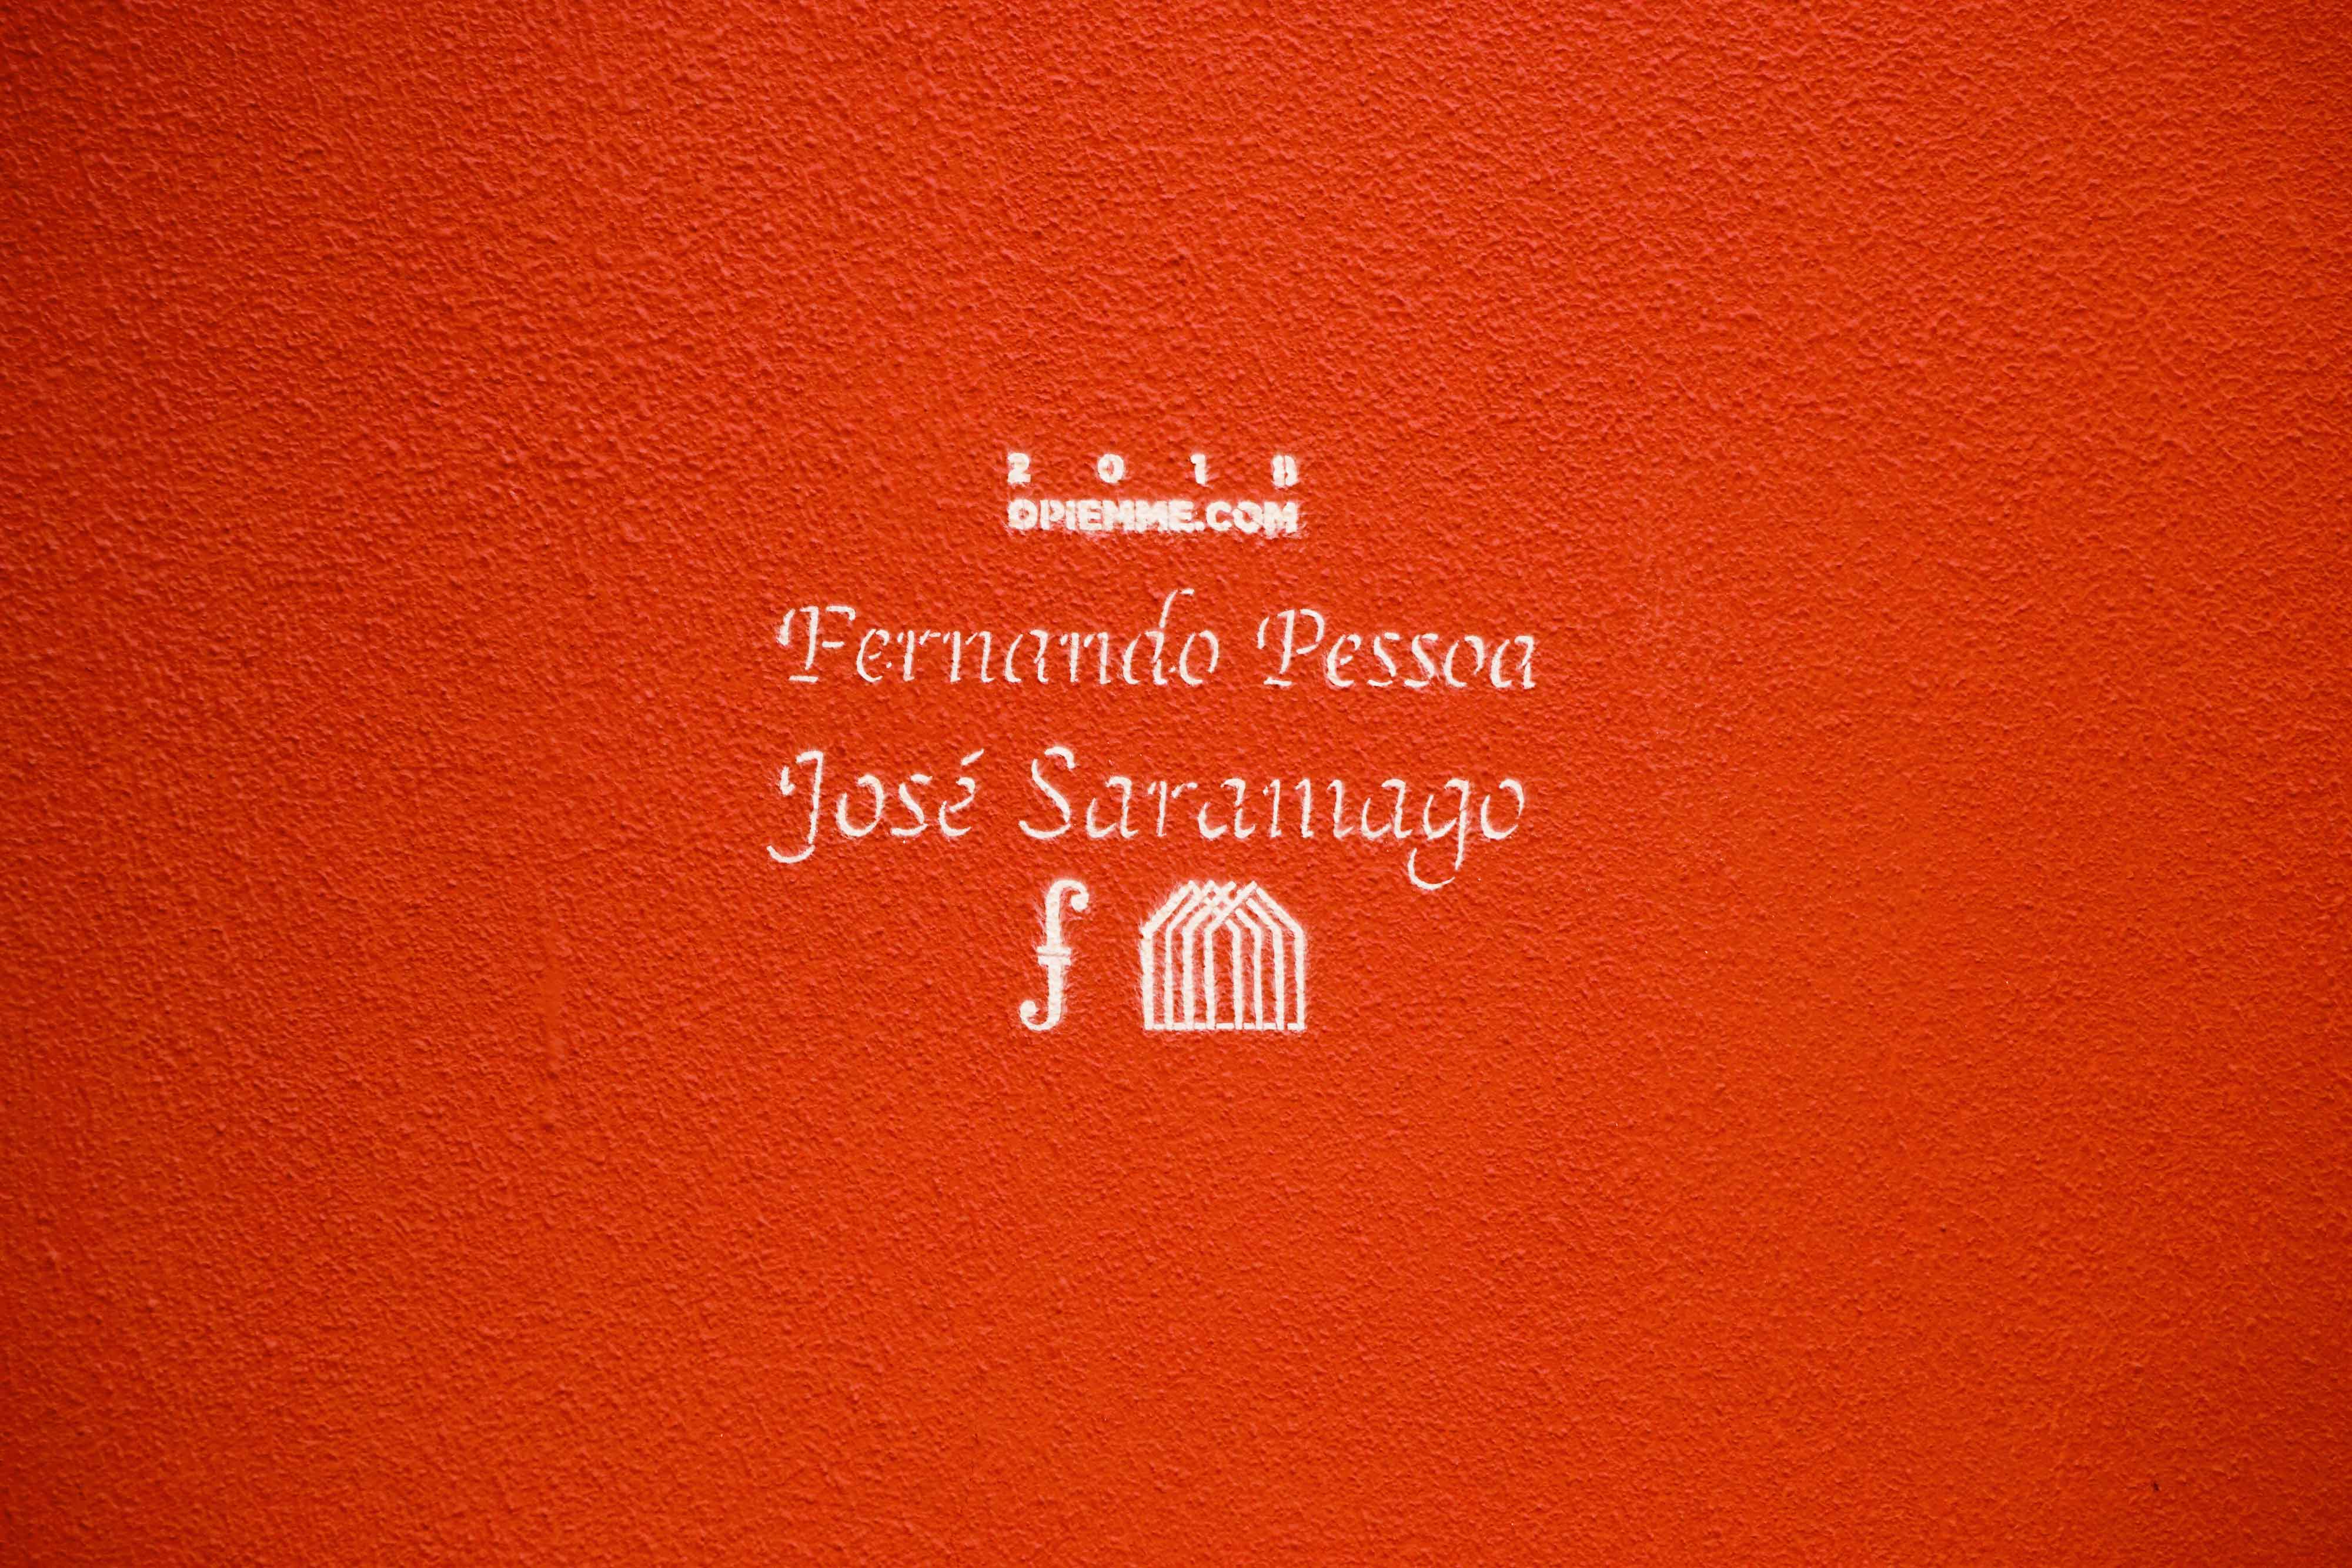 To Pessoa and Saramago: a poetry homage by Opiemme in Lisbon, Portugal. Artes & contextos Opiemme5